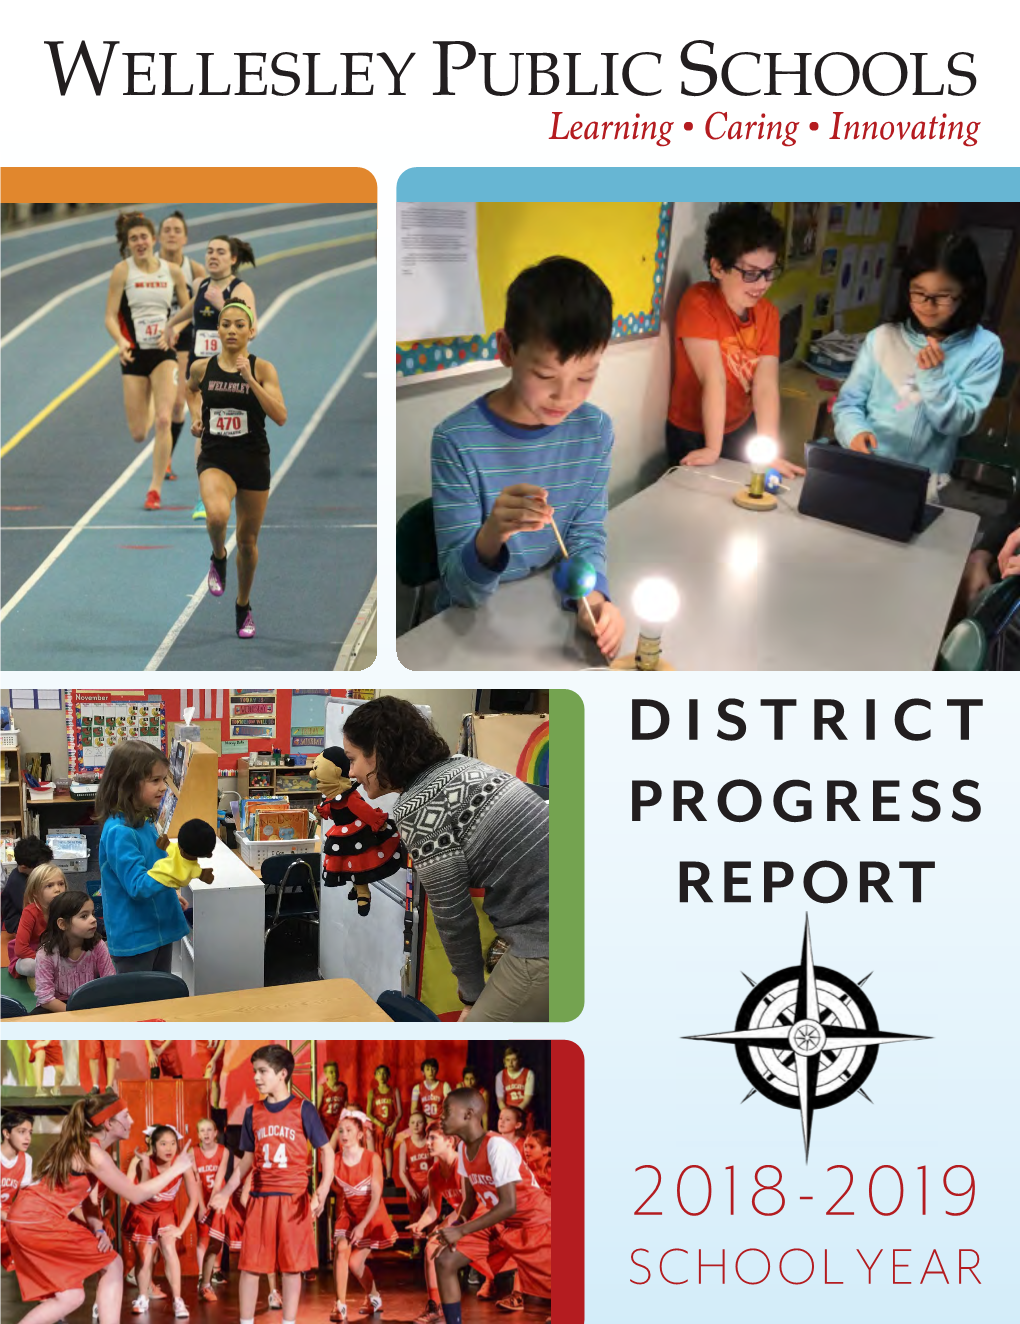 WPS District Progress Report for the 2018-19 School Year